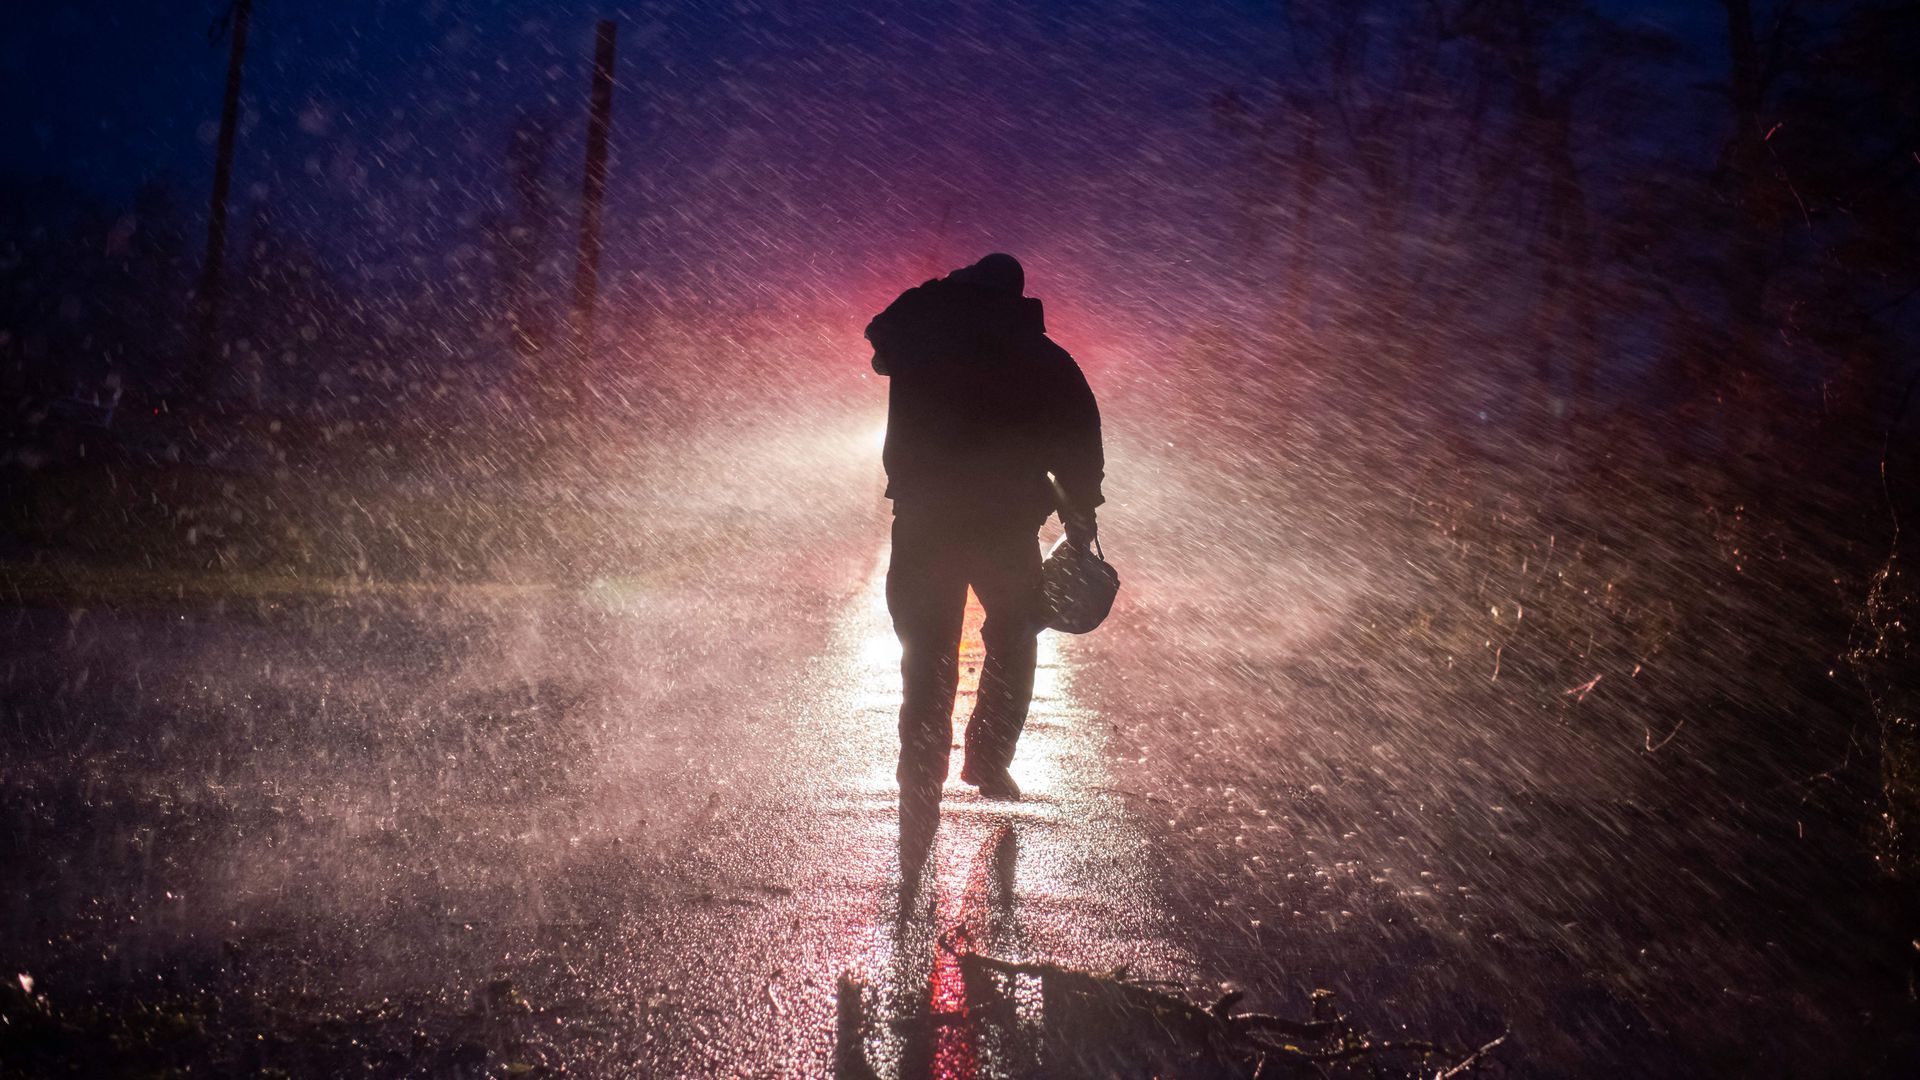  Montegut fire chief Toby Henry walks back to his fire truck in the rain as firefighters cut through trees on the road in Bourg, Louisiana as Hurricane Ida passes on August 29